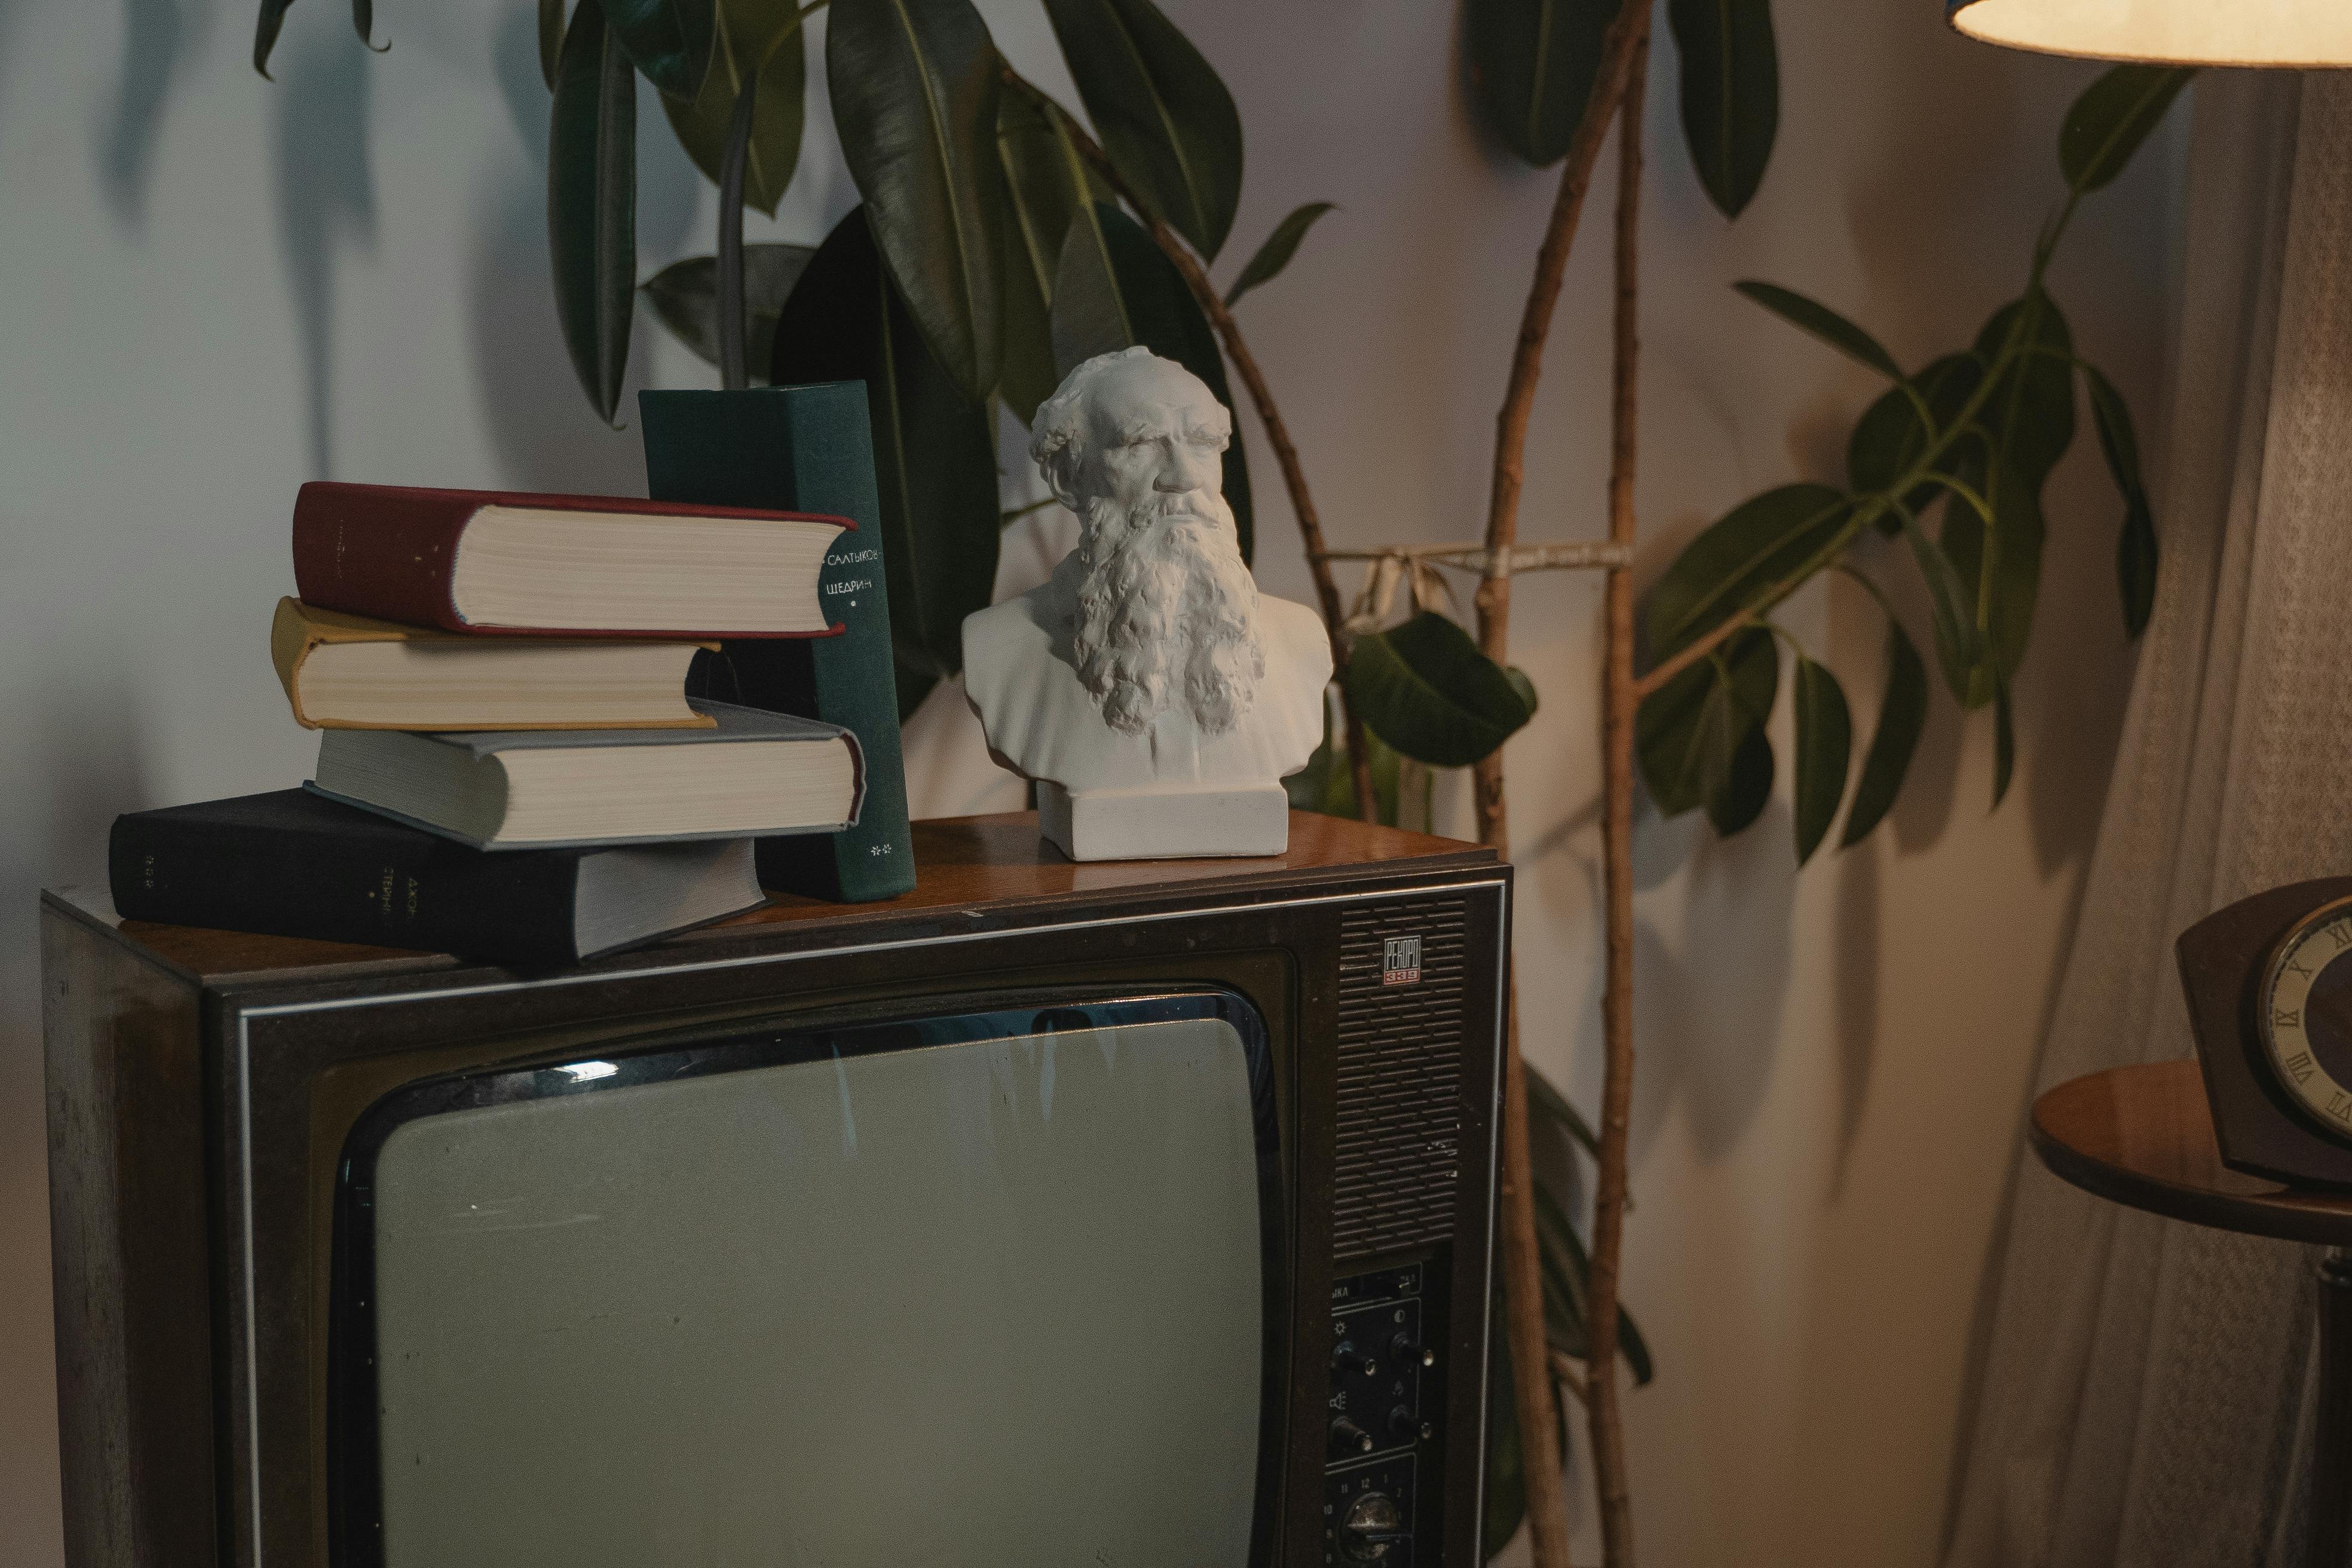 stacked books and a head bust on top of crt television